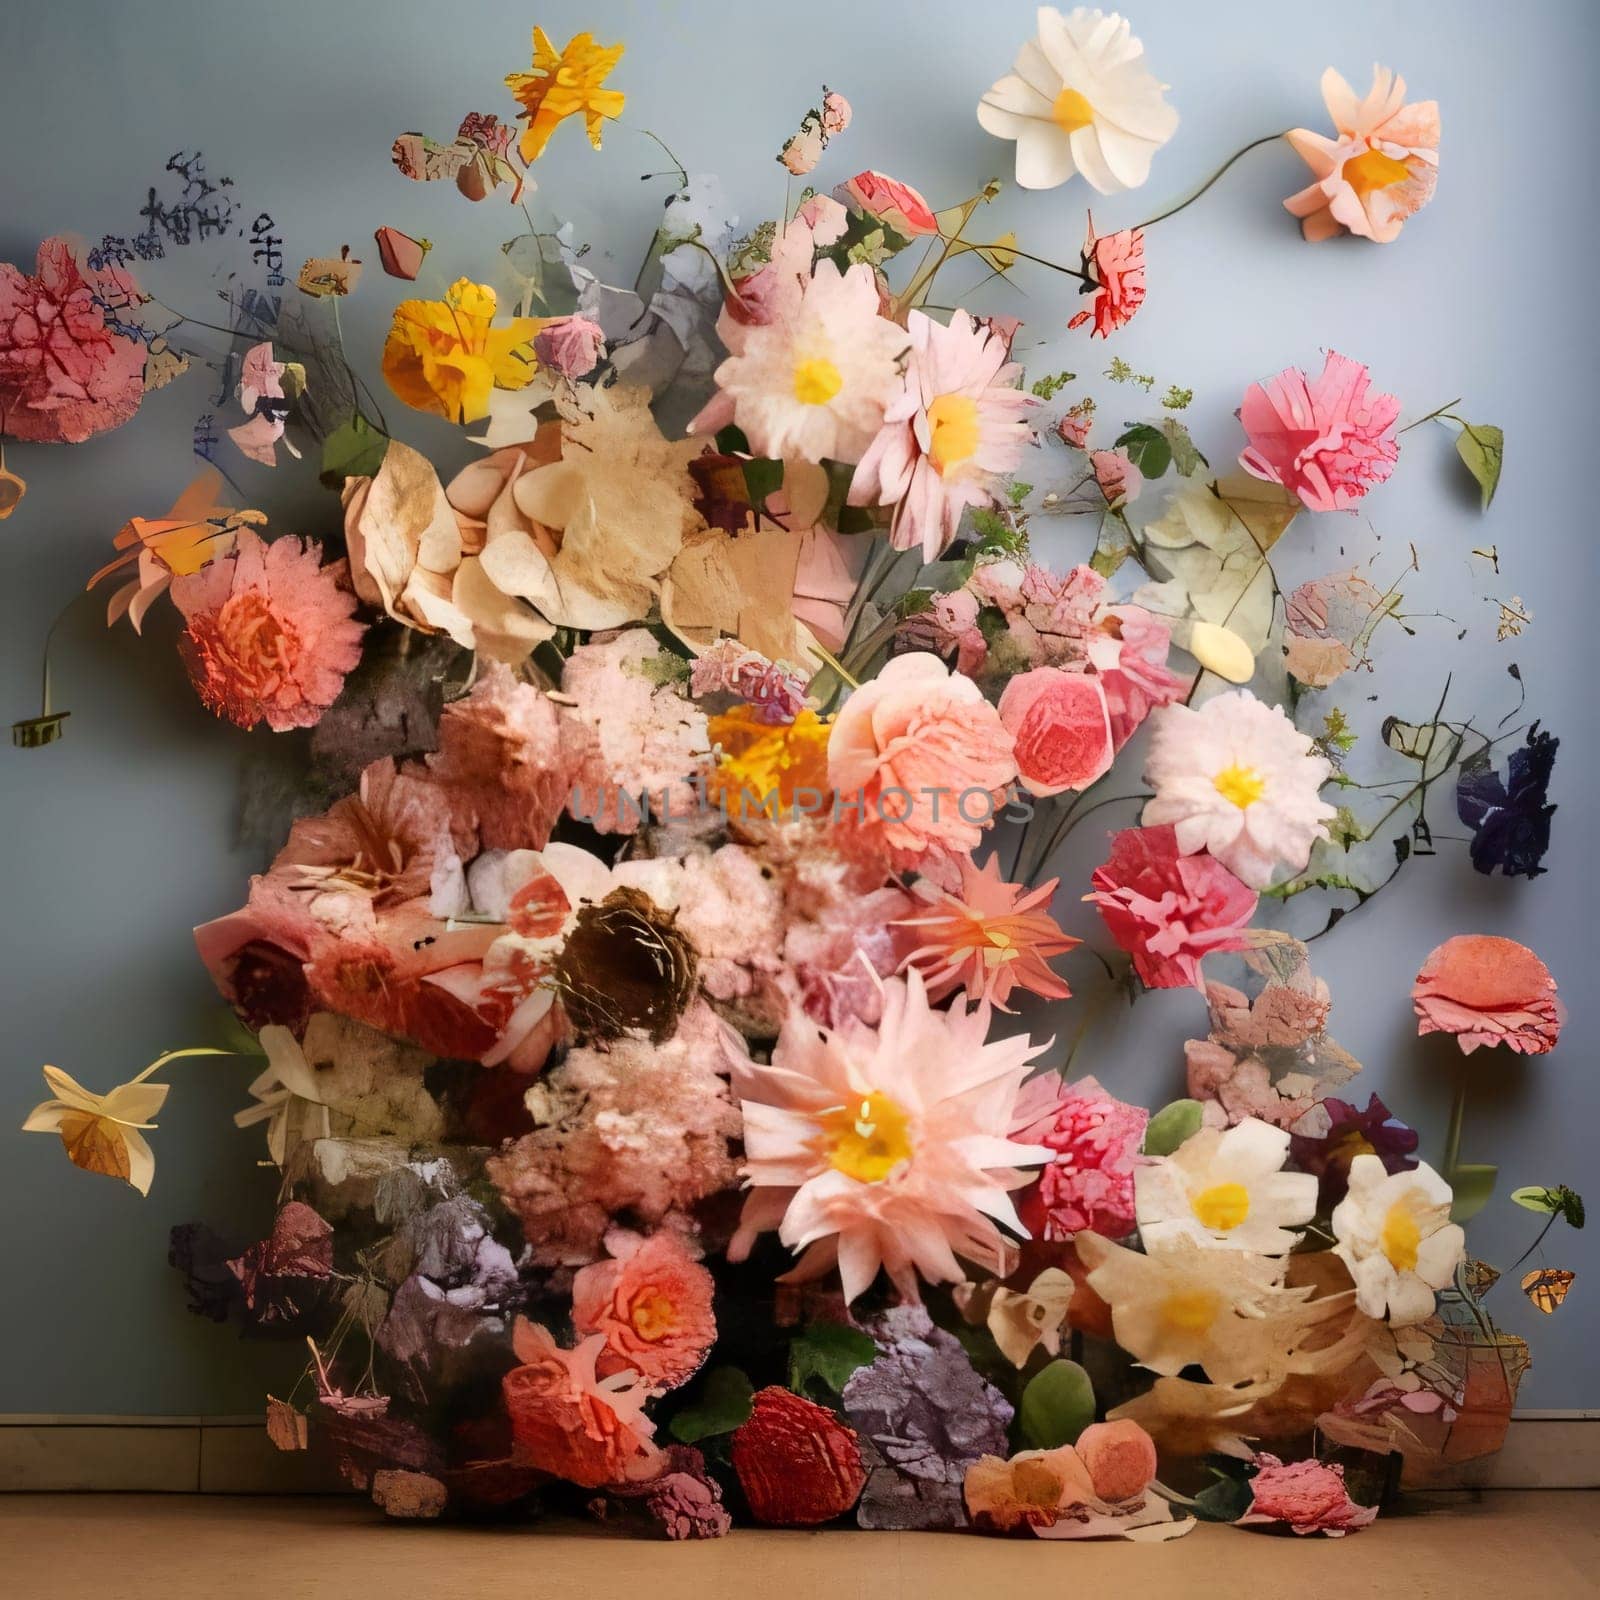 Abstract, mixed bouquet of colorful flowers of different kinds and species. Flowering flowers, a symbol of spring, new life. A joyful time of nature waking up to life.